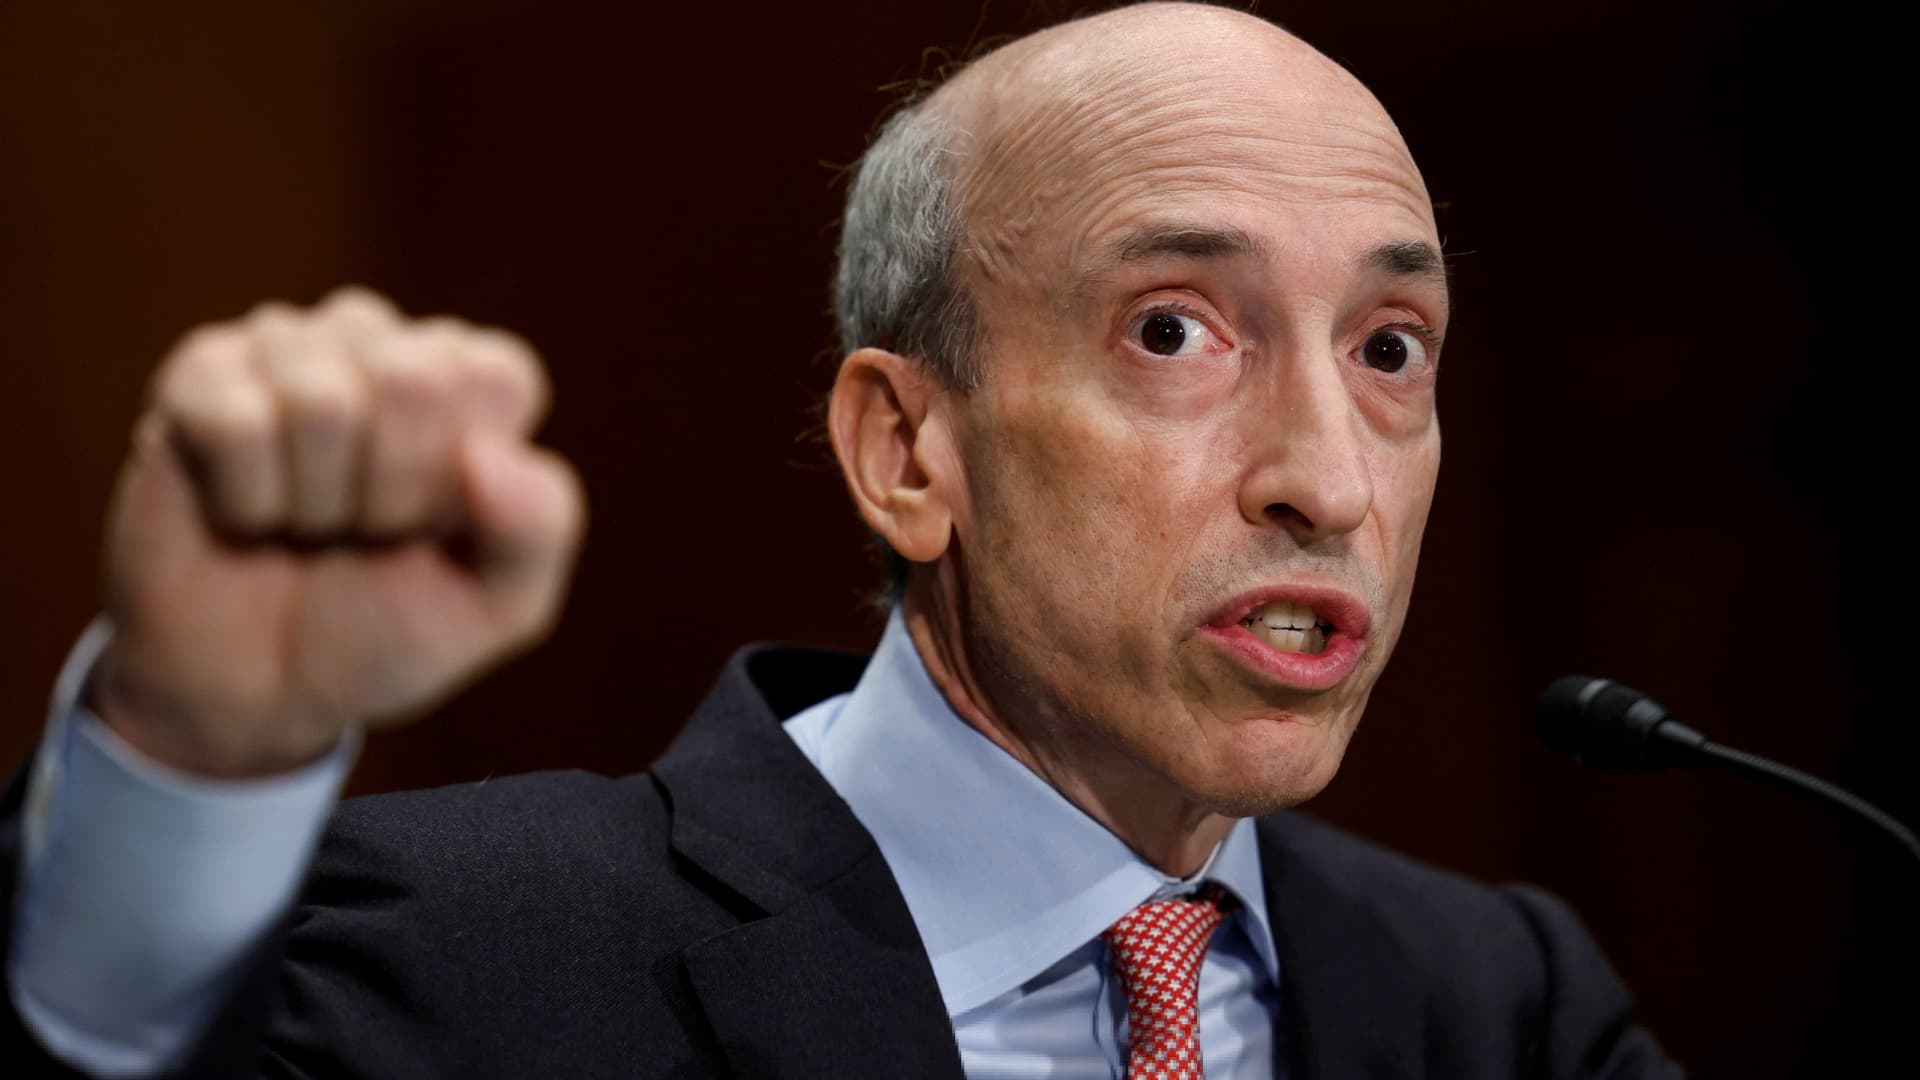 SEC's Gensler says 'the law is clear' for crypto exchanges and that they must comply with regulators